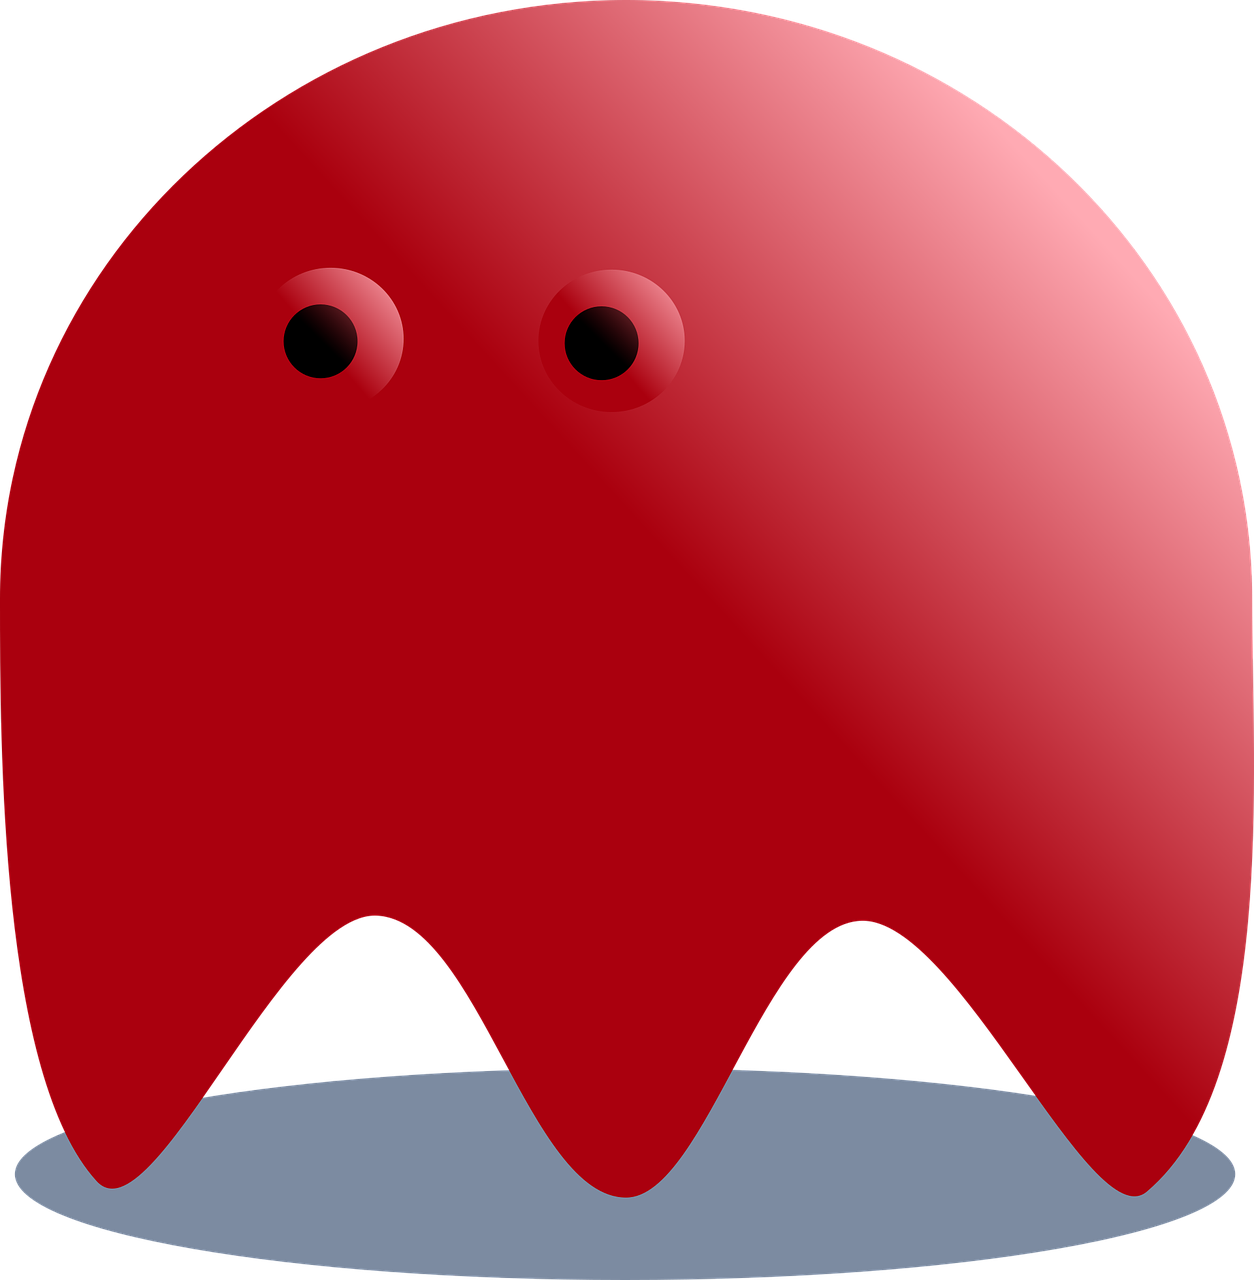 red ghost pacman free photo